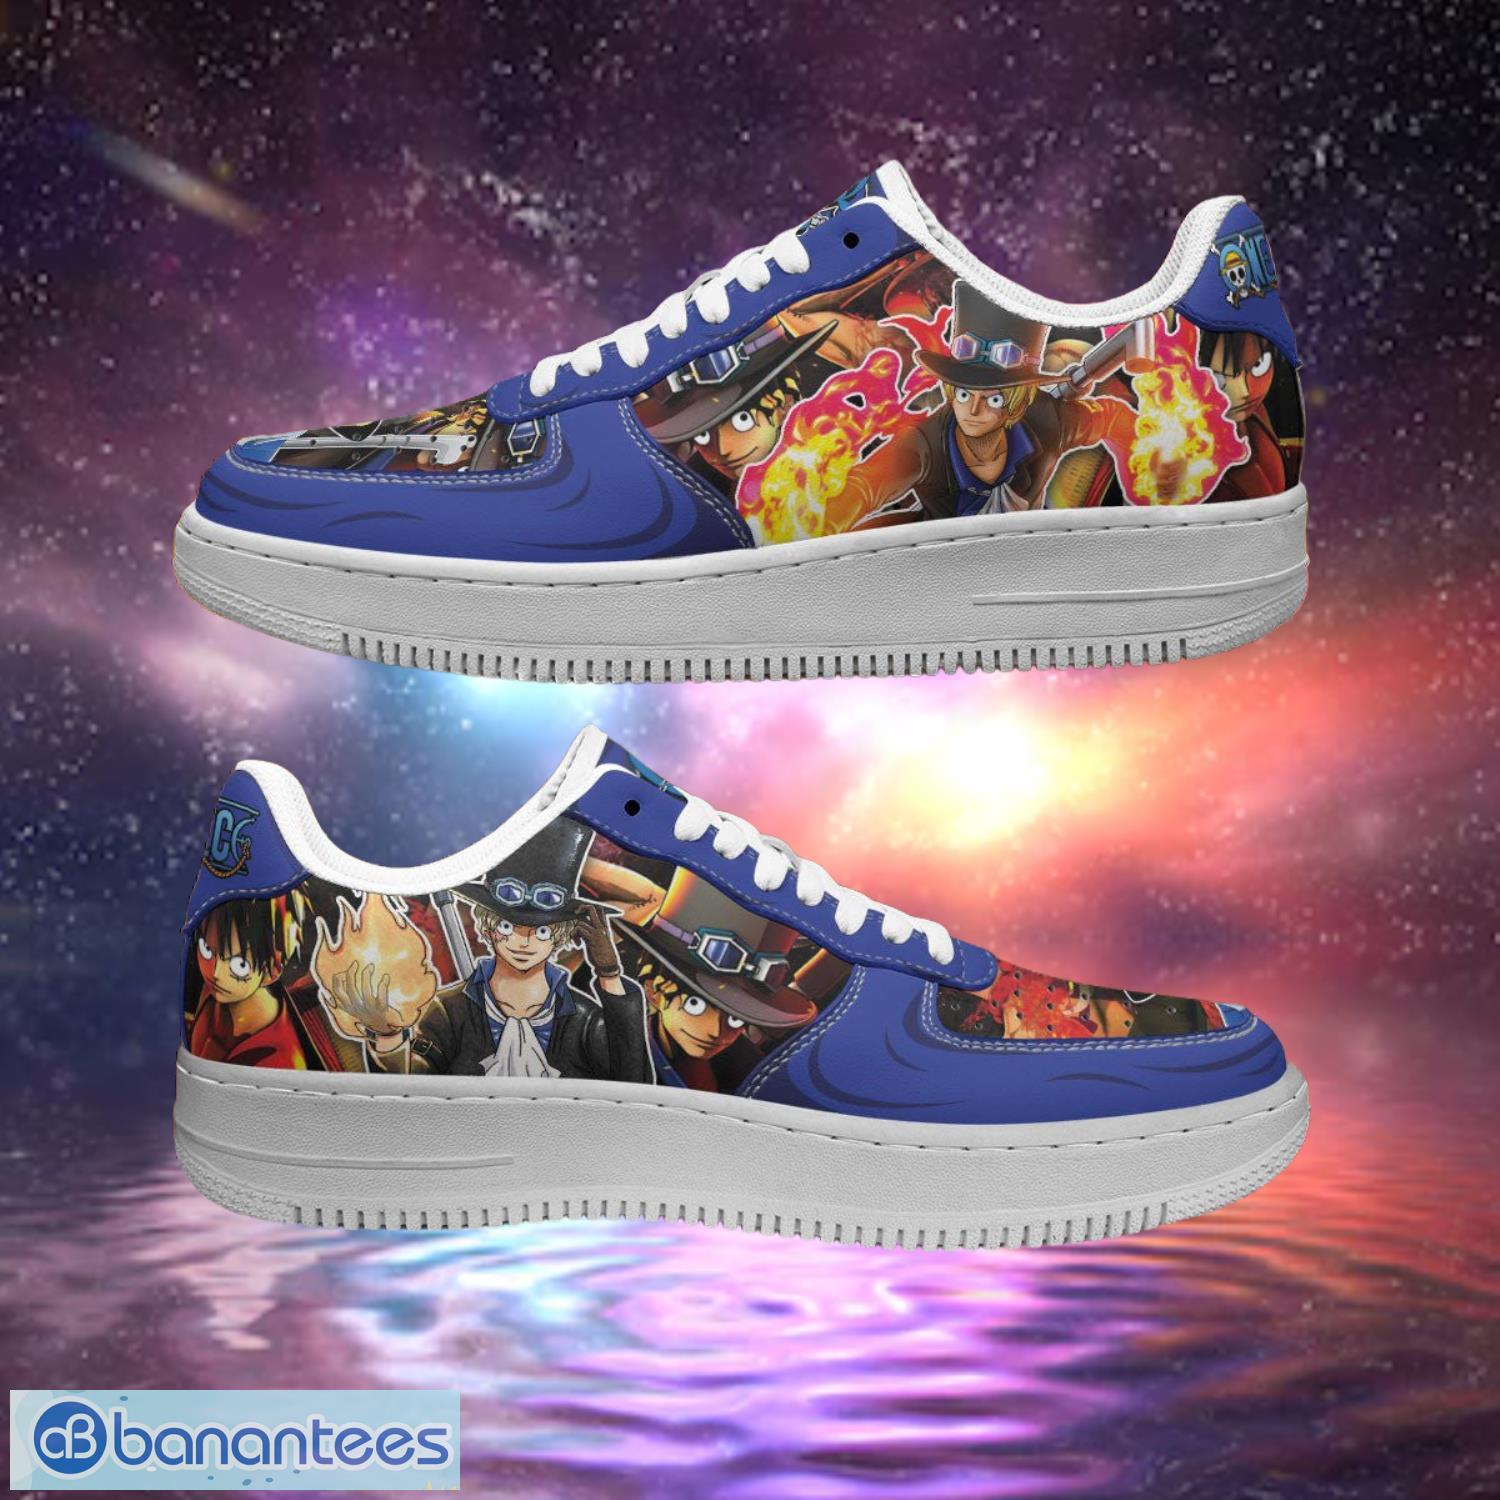 One Piece Sabo Air Sneakers Custom Anime Shoes Product Photo 1